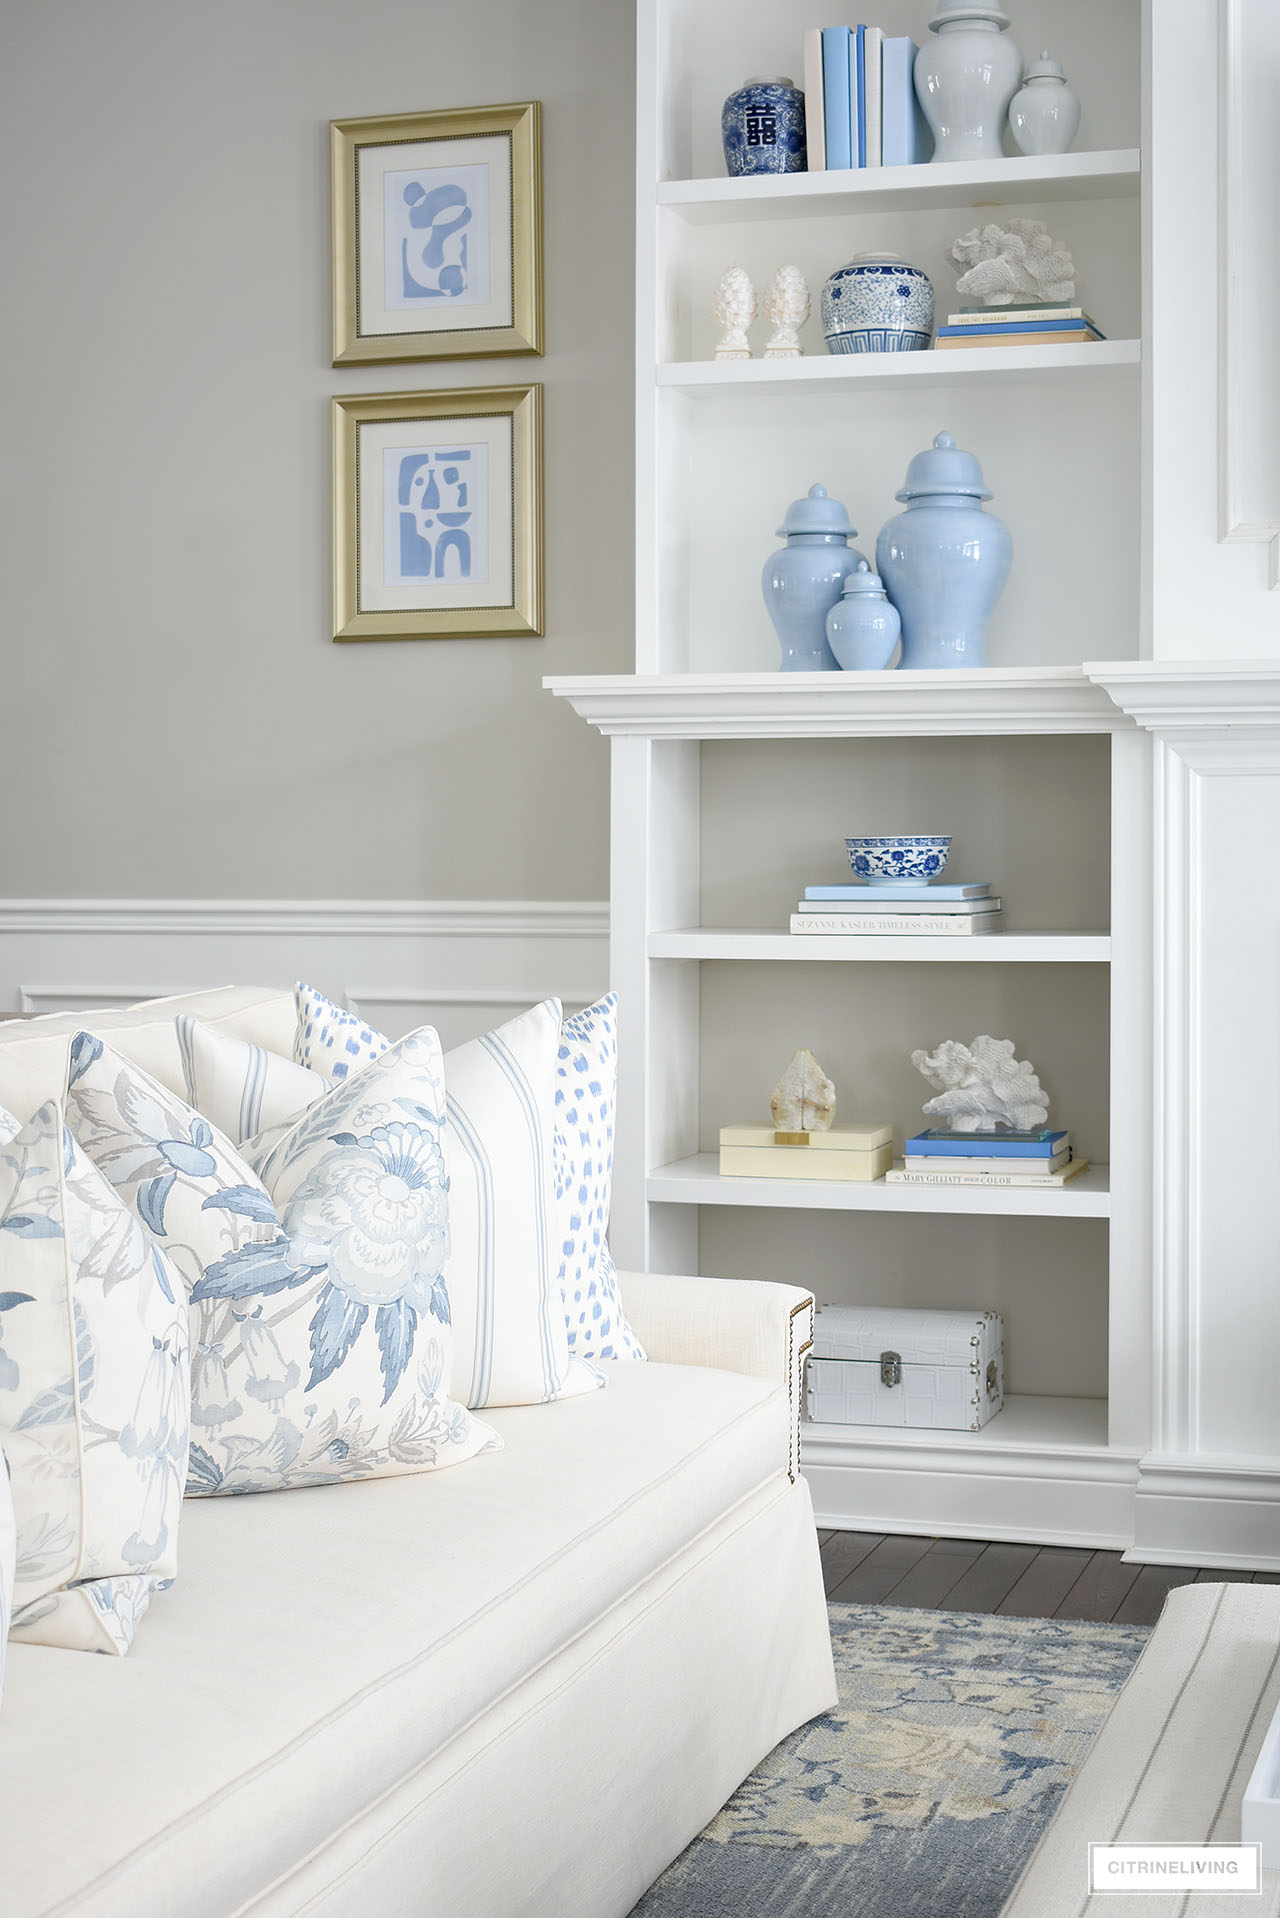 A beautiful collection of ginger jars, decorative books, coral sculptures, bookends and decorative boxes, bowls and planters styled on builtin bookshelves in shades of blue and white is an elegant take on spring decorating.